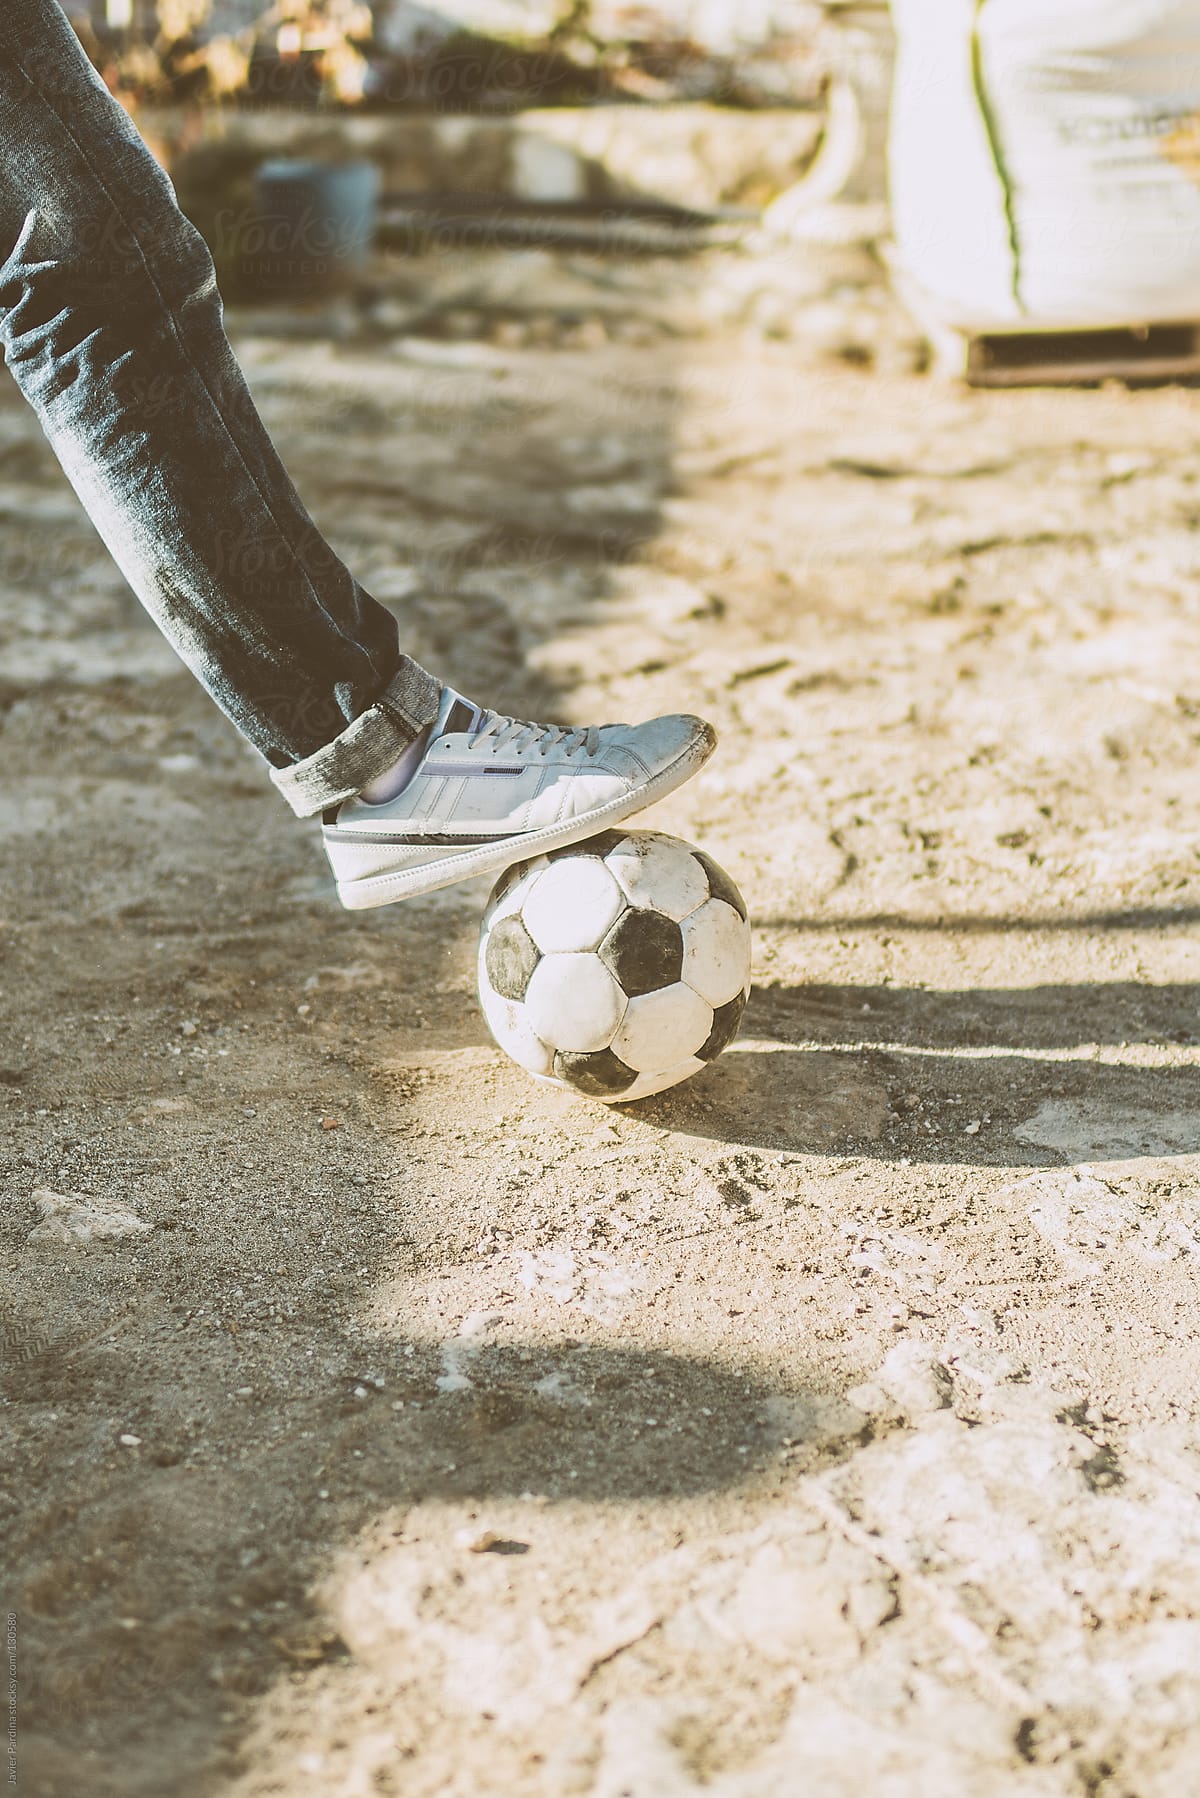 Foot stopping a soccer ball.